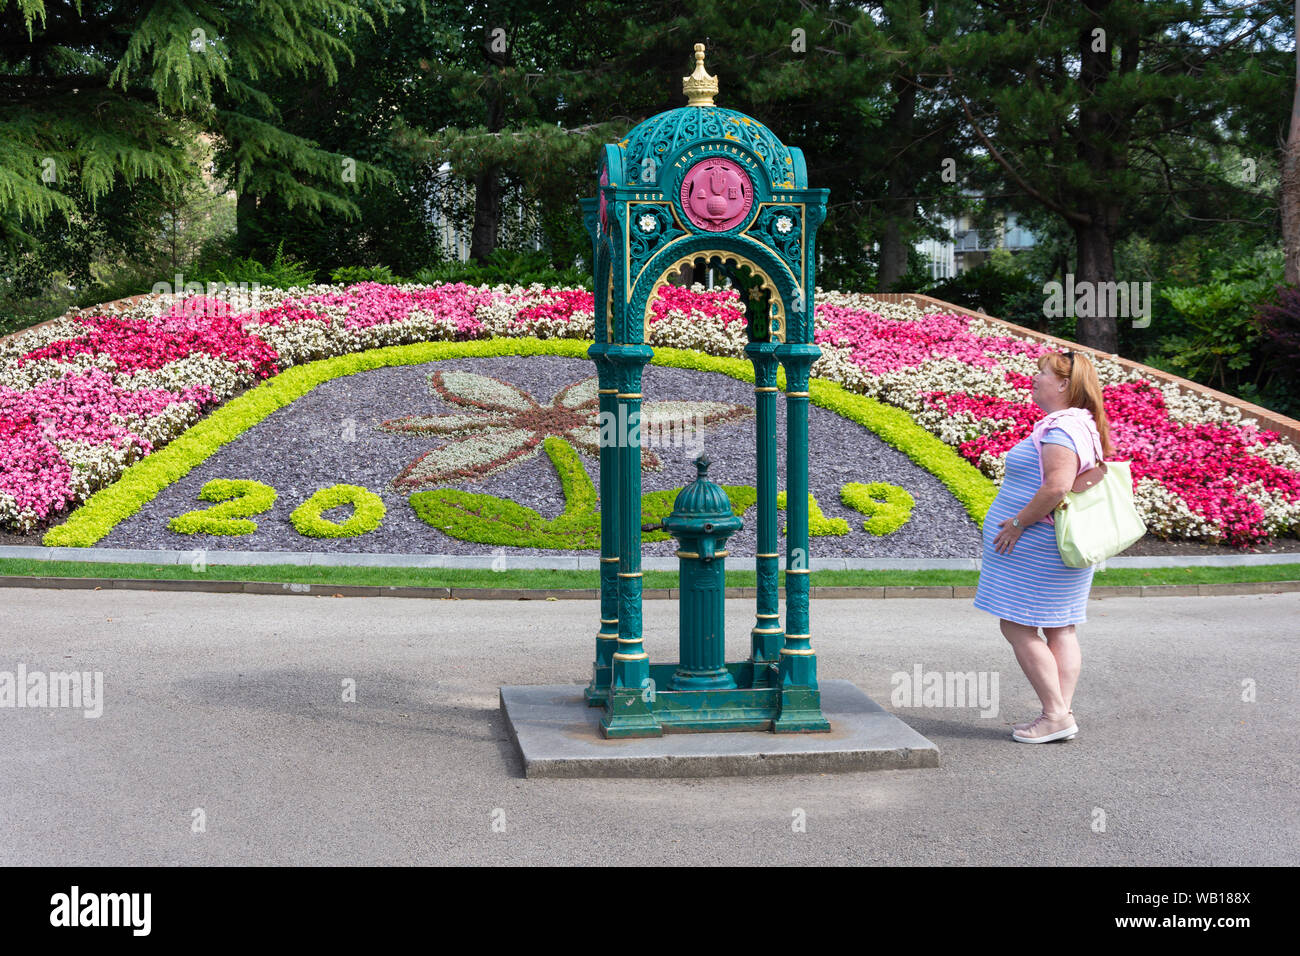 Floral display and memorial drinking fountain in Mowbray Park, Sunderland, Tyne and Wear, England, United Kingdom Stock Photo